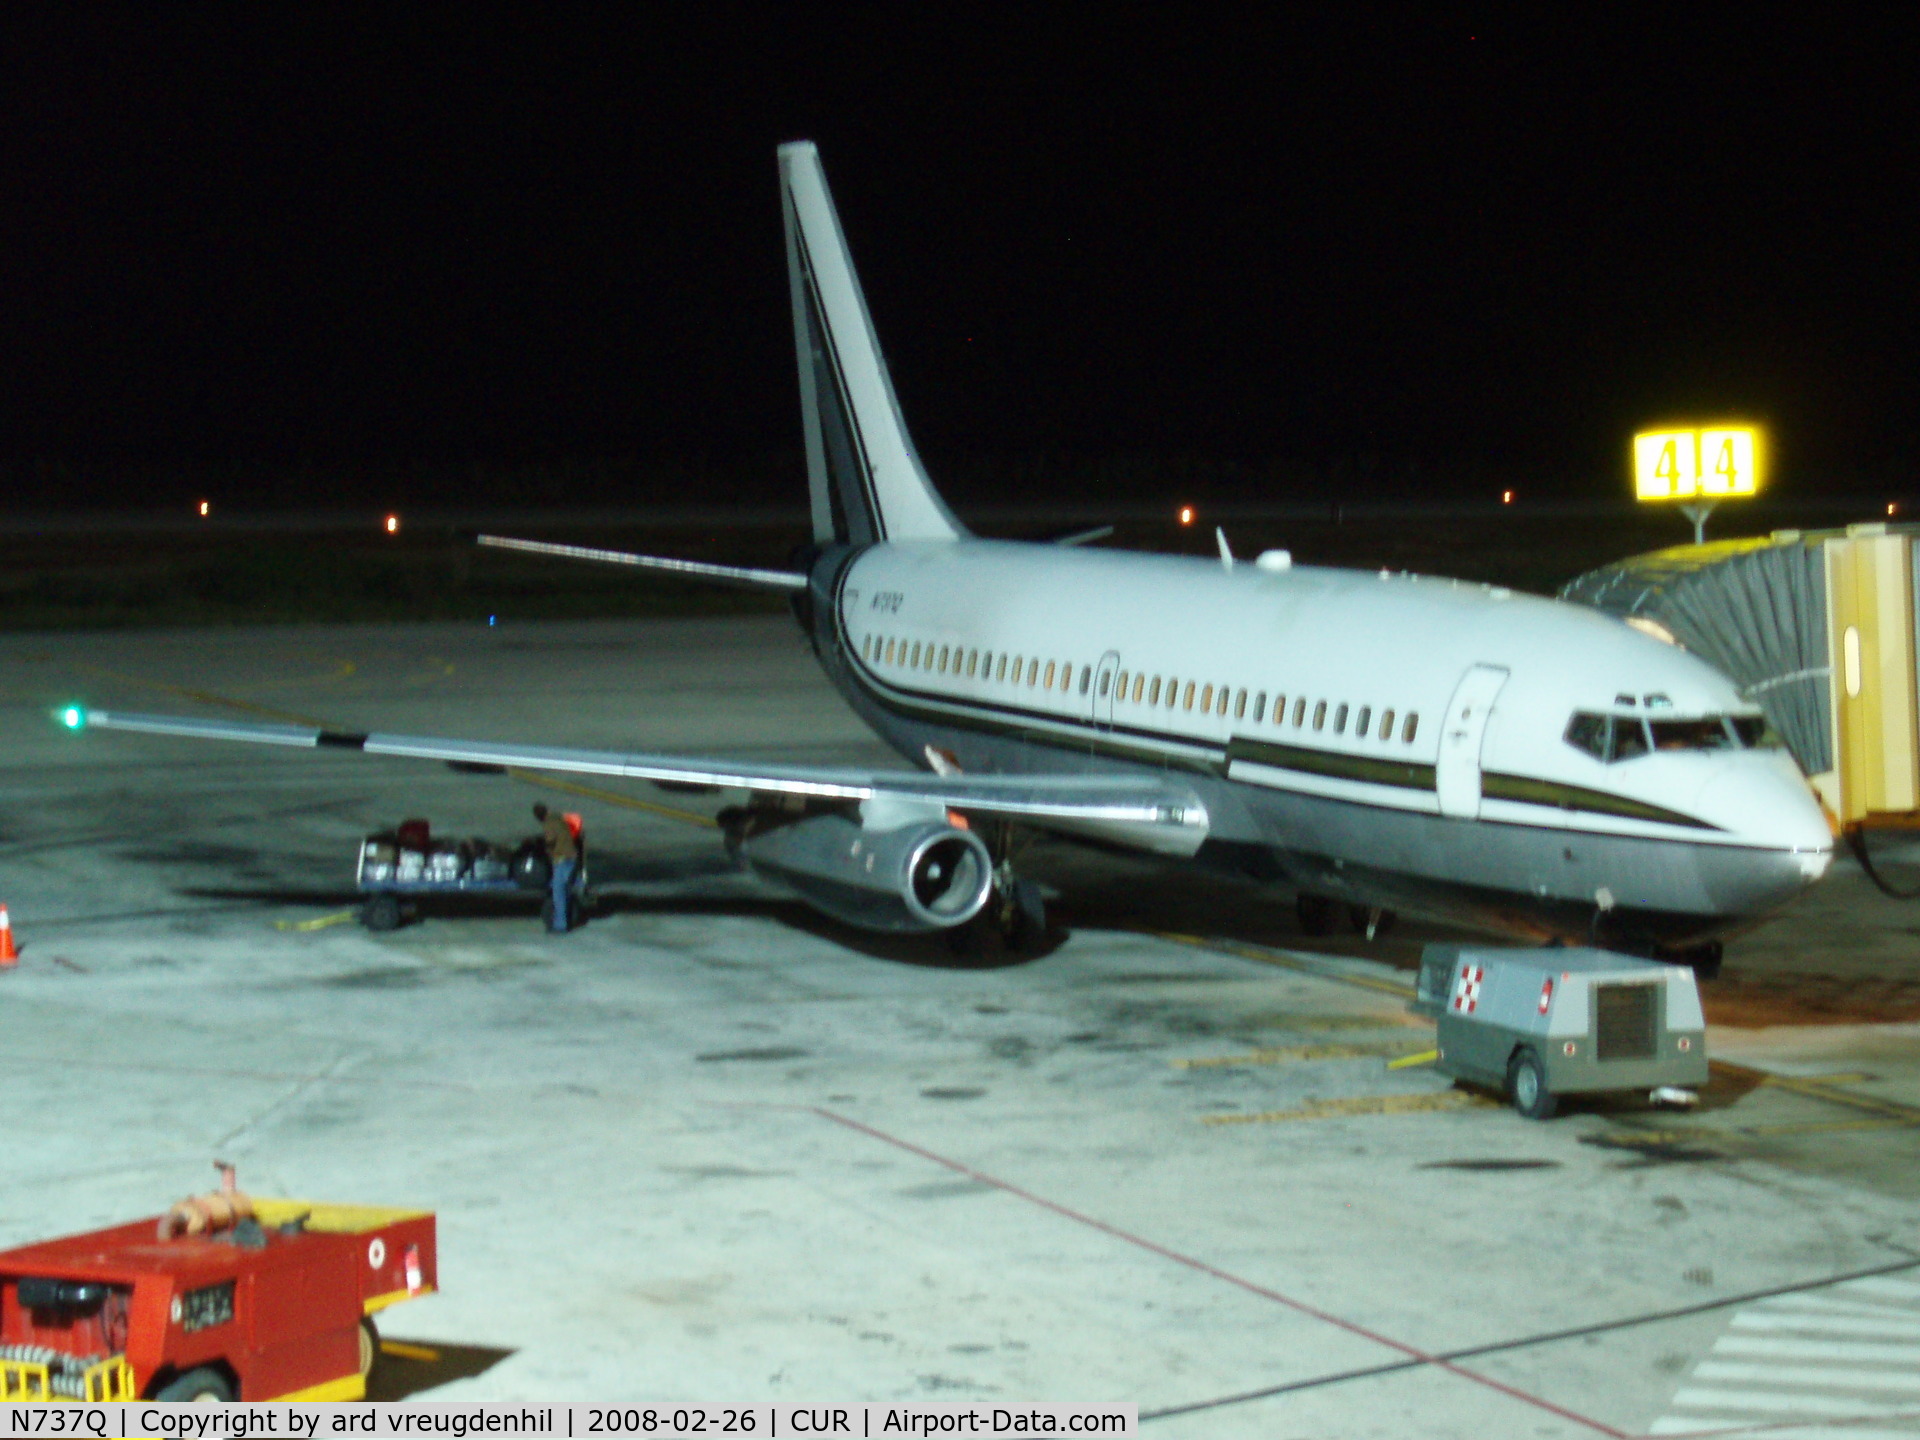 N737Q, 1976 Boeing 737-2L9 C/N 21279, seen at Hato airport (curacao)